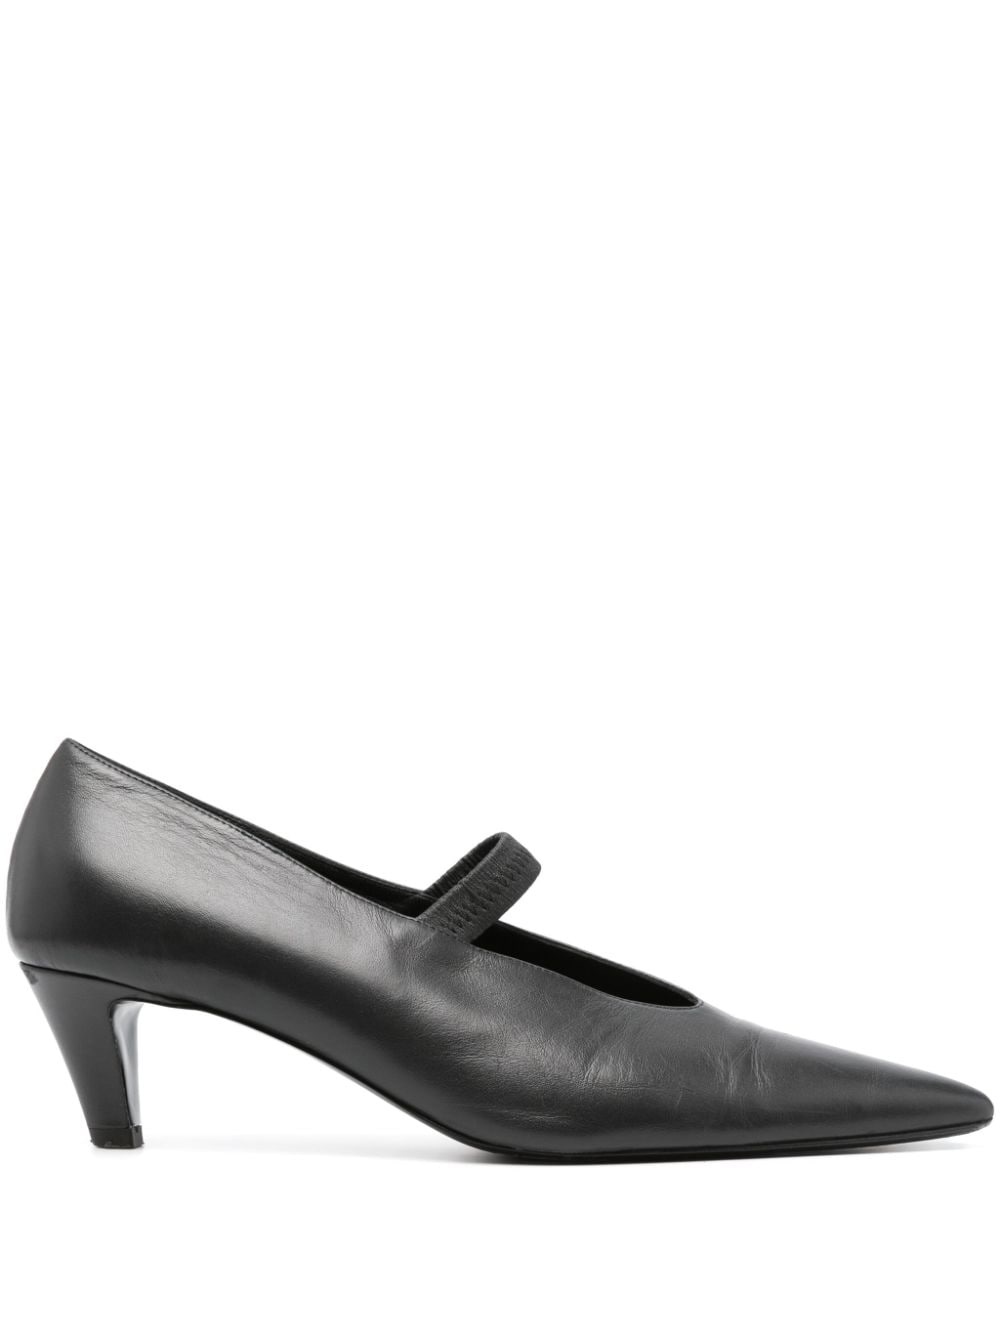 pointed toe 55mm Mary Janes - 1